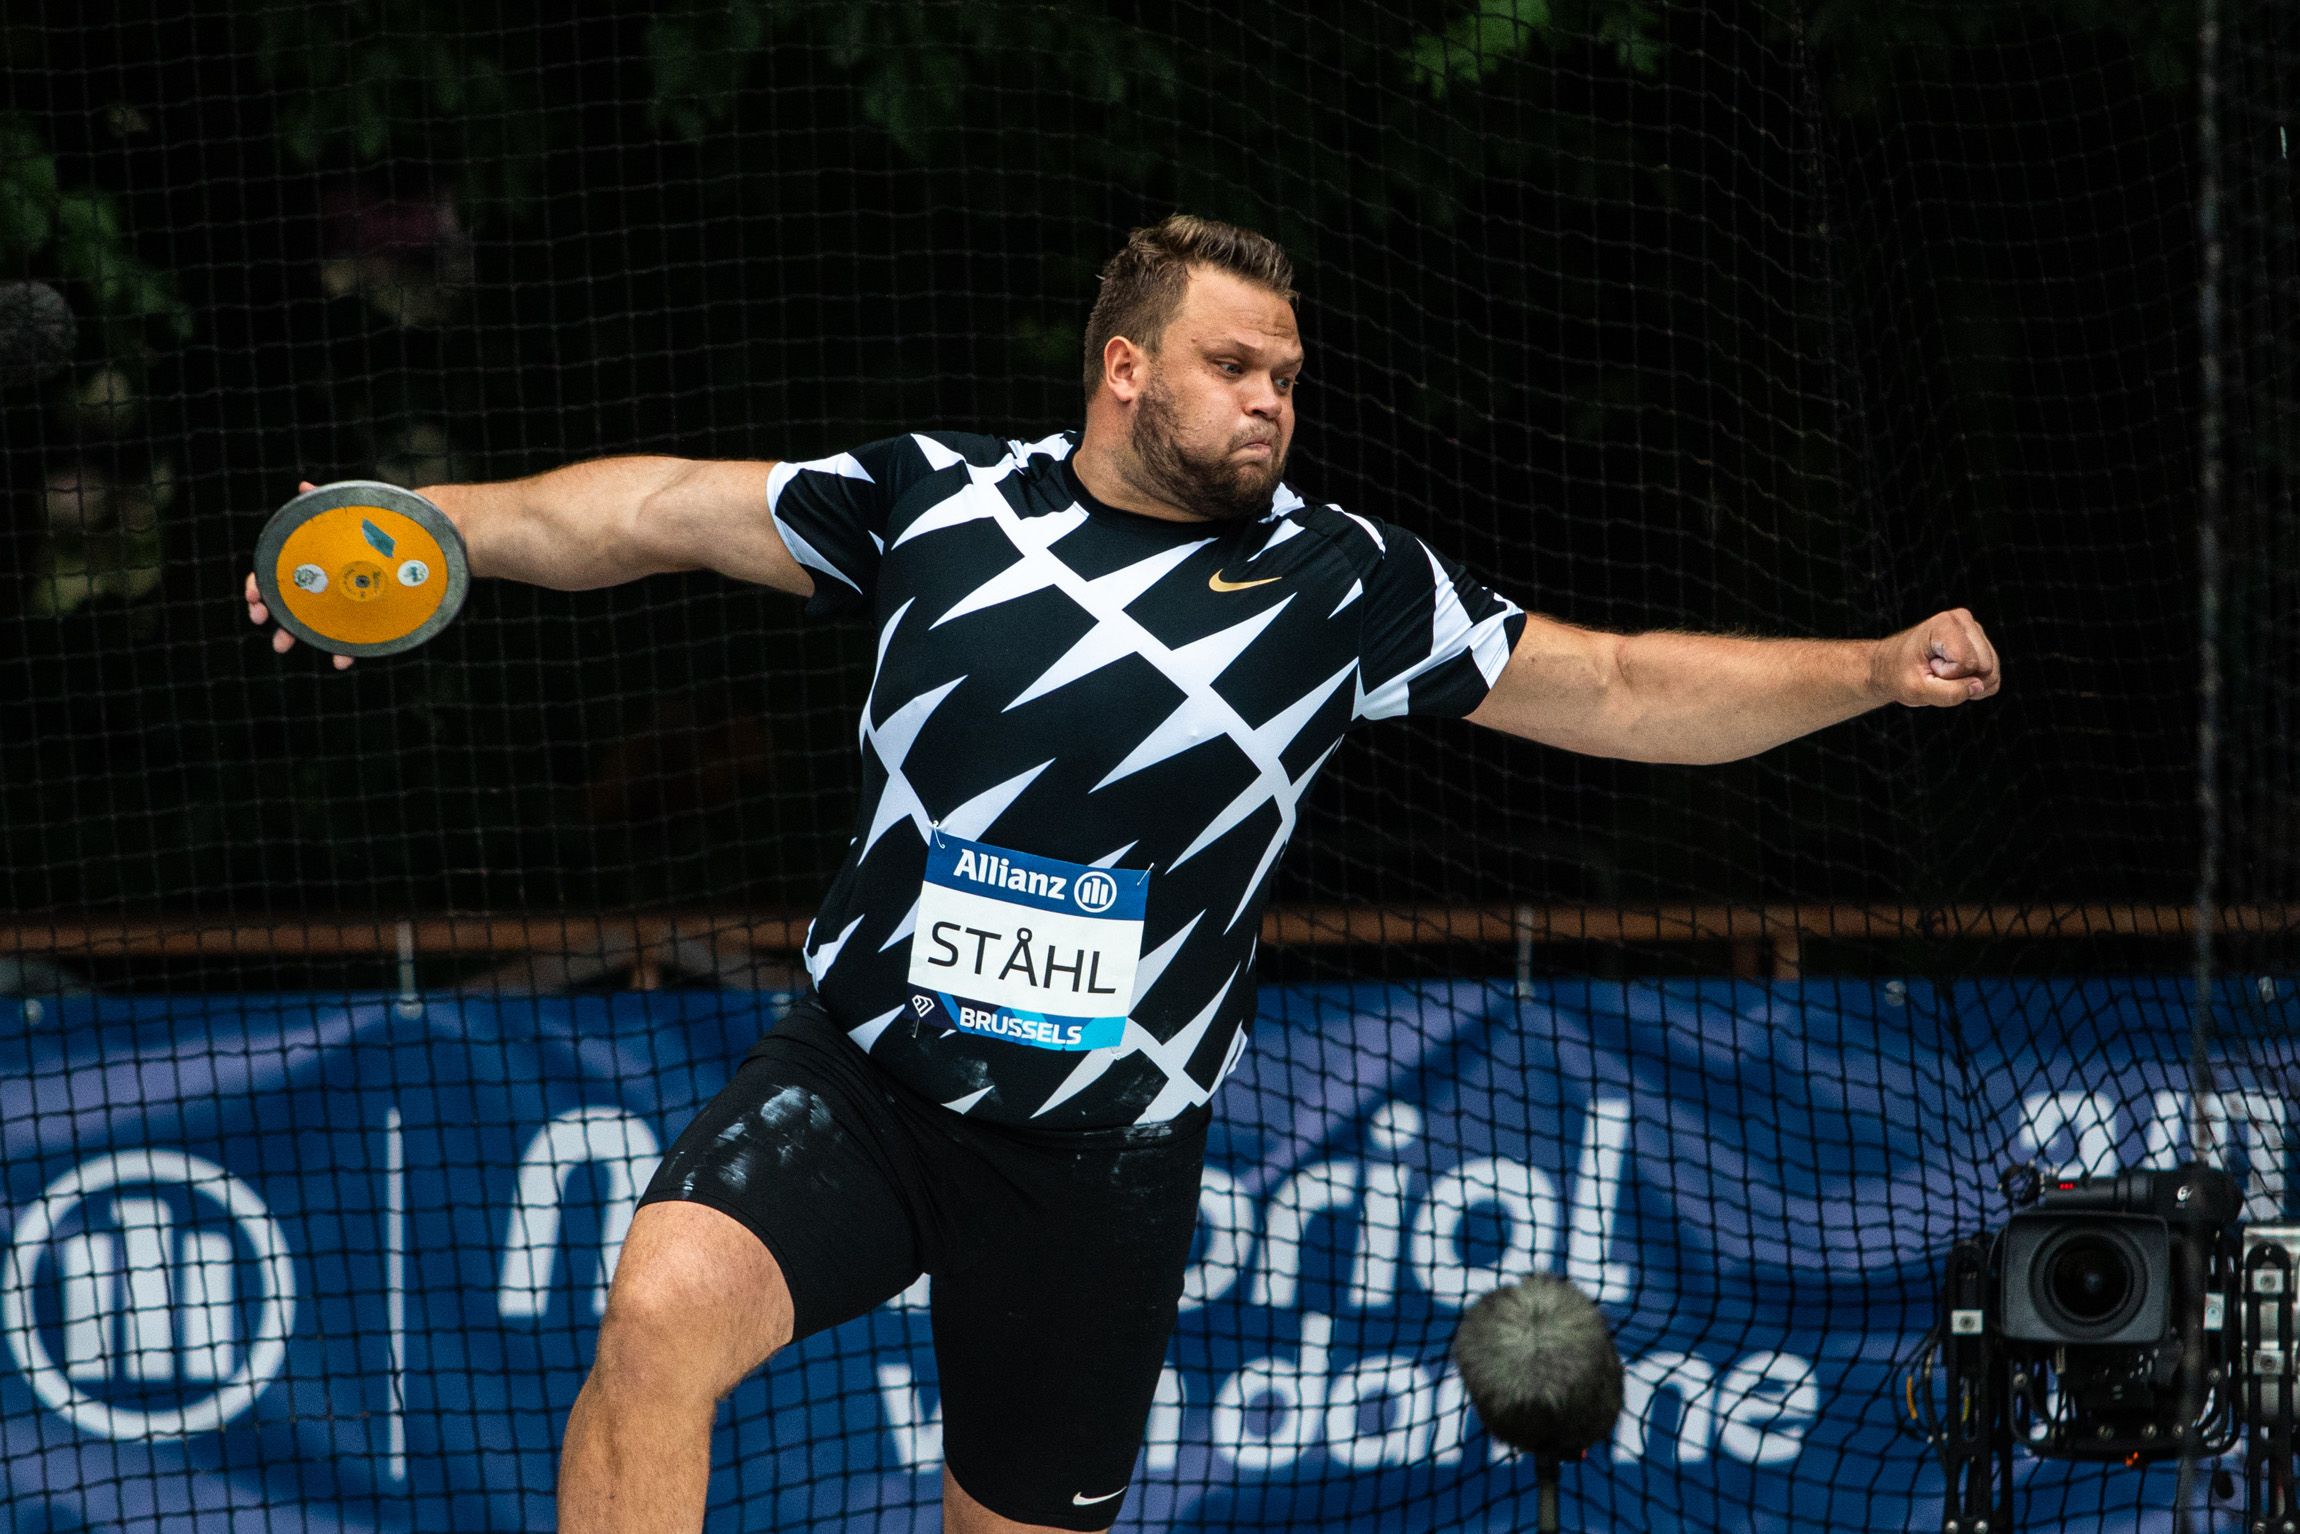 Daniel Stahl in discus action at the Wanda Diamond League meeting in Brussels